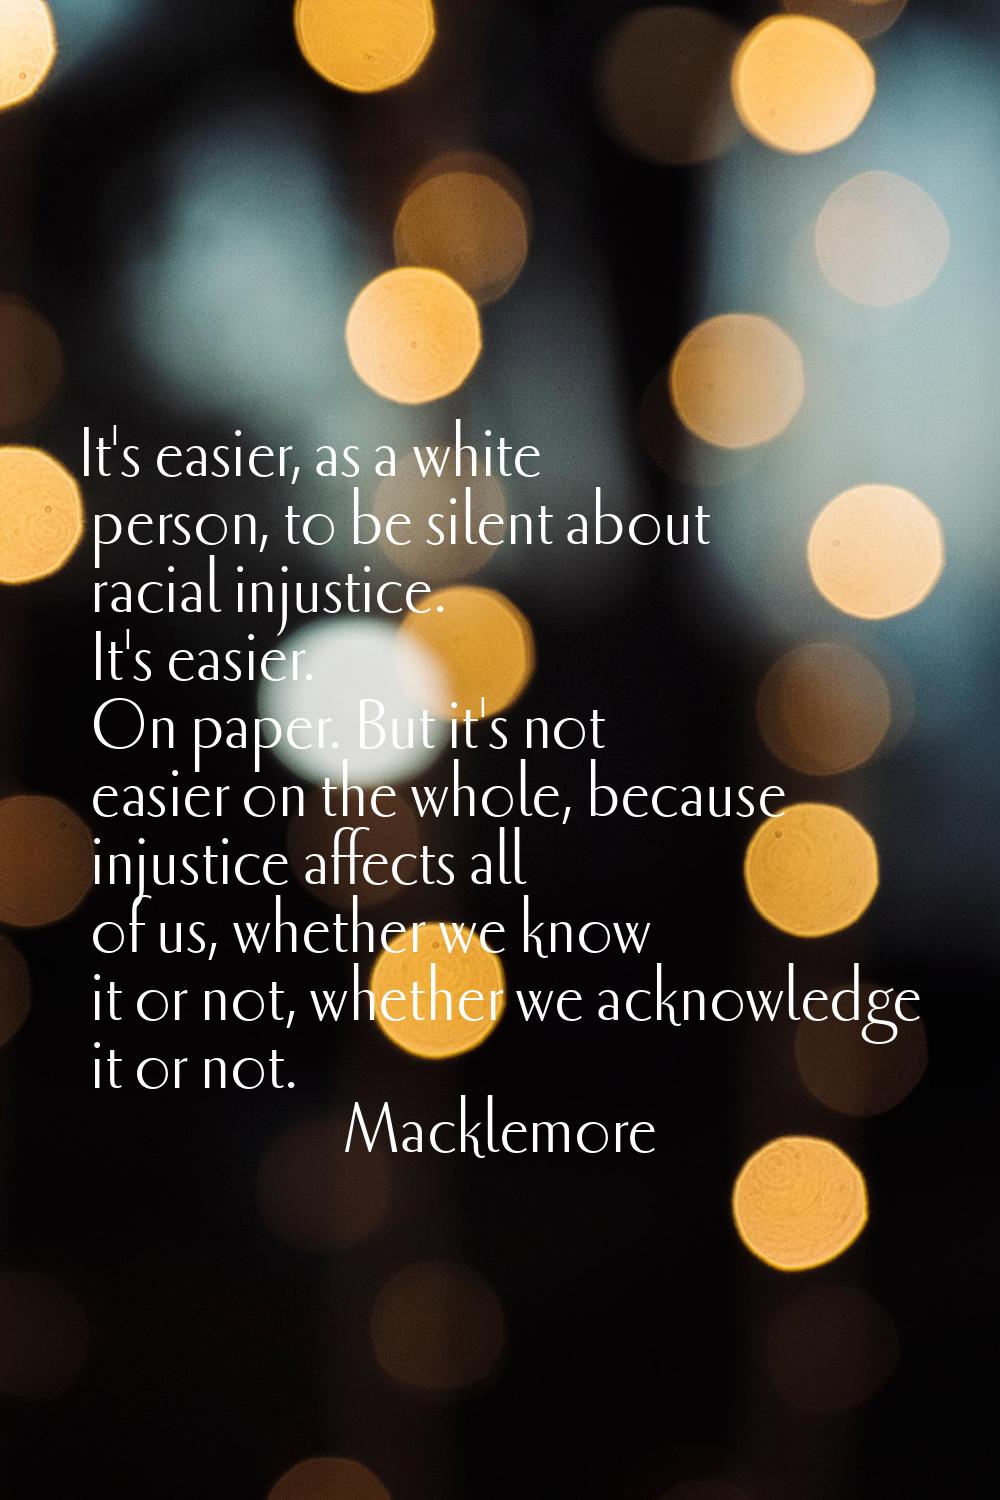 It's easier, as a white person, to be silent about racial injustice. It's easier. On paper. But it'